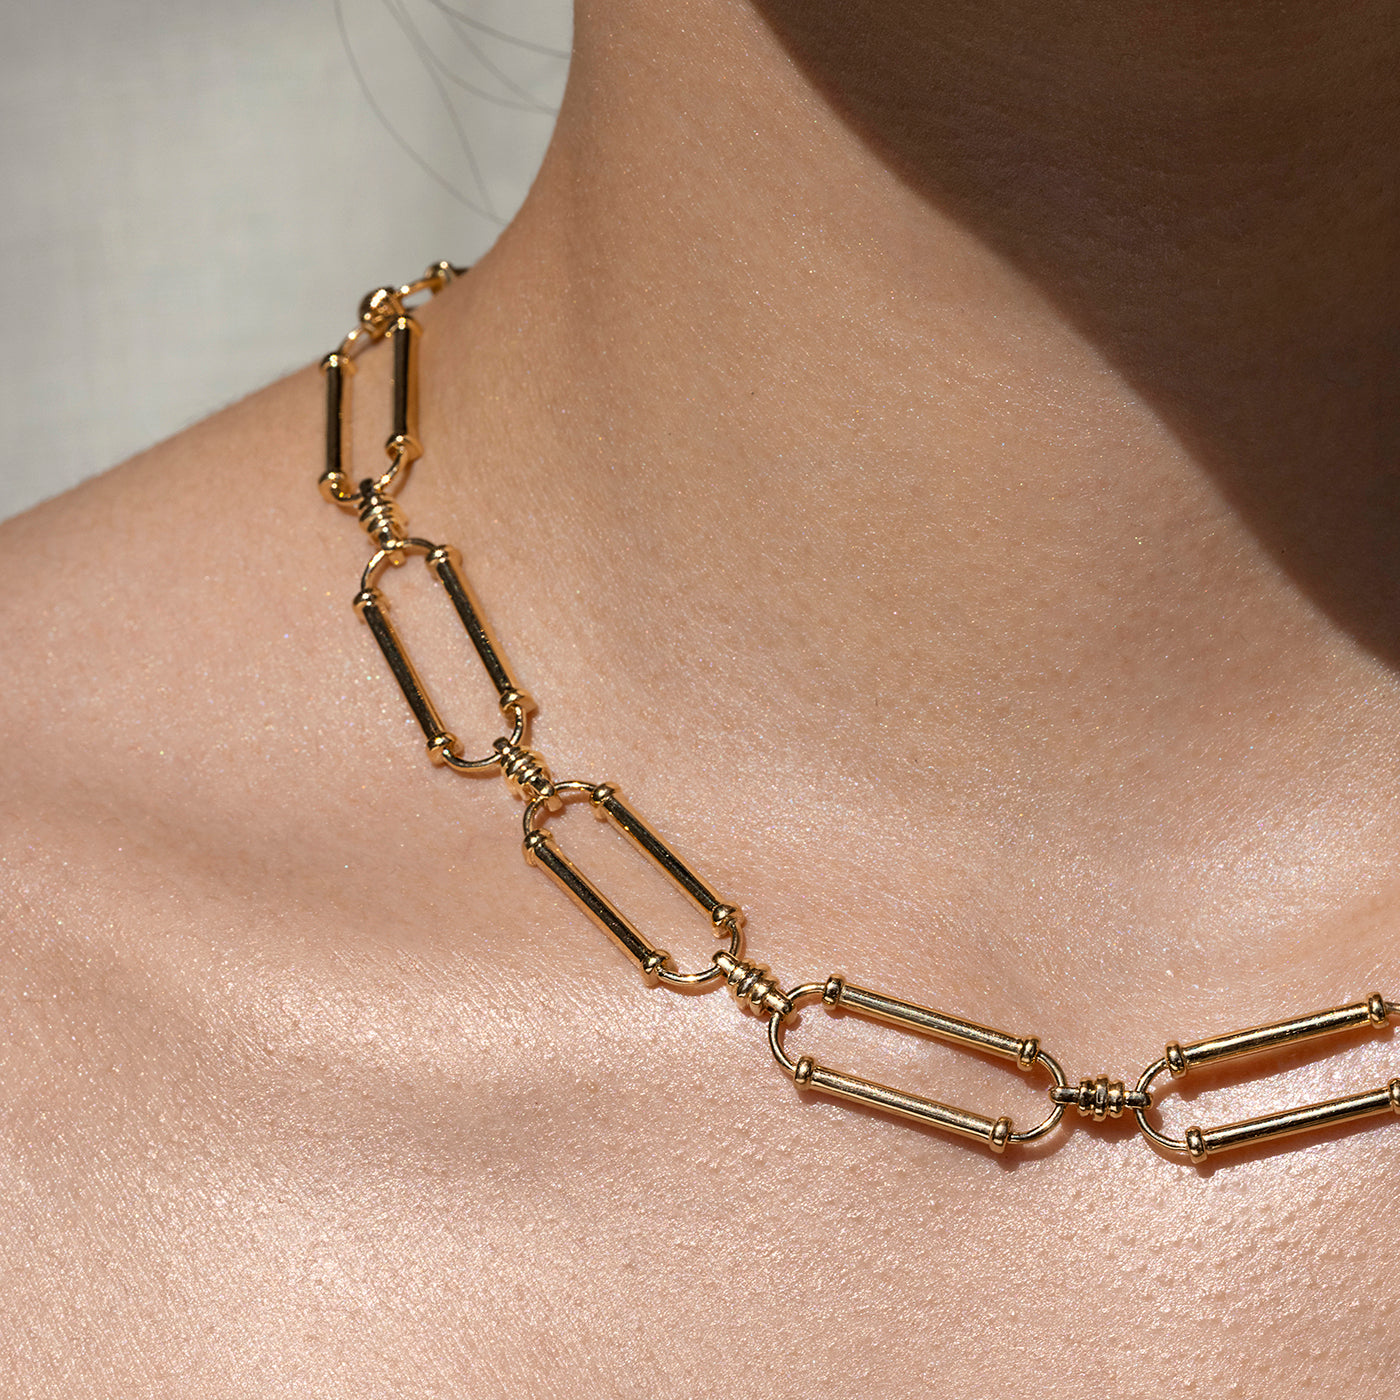 Close up of links on our ethical gold oval link necklace worn against a woman's skin